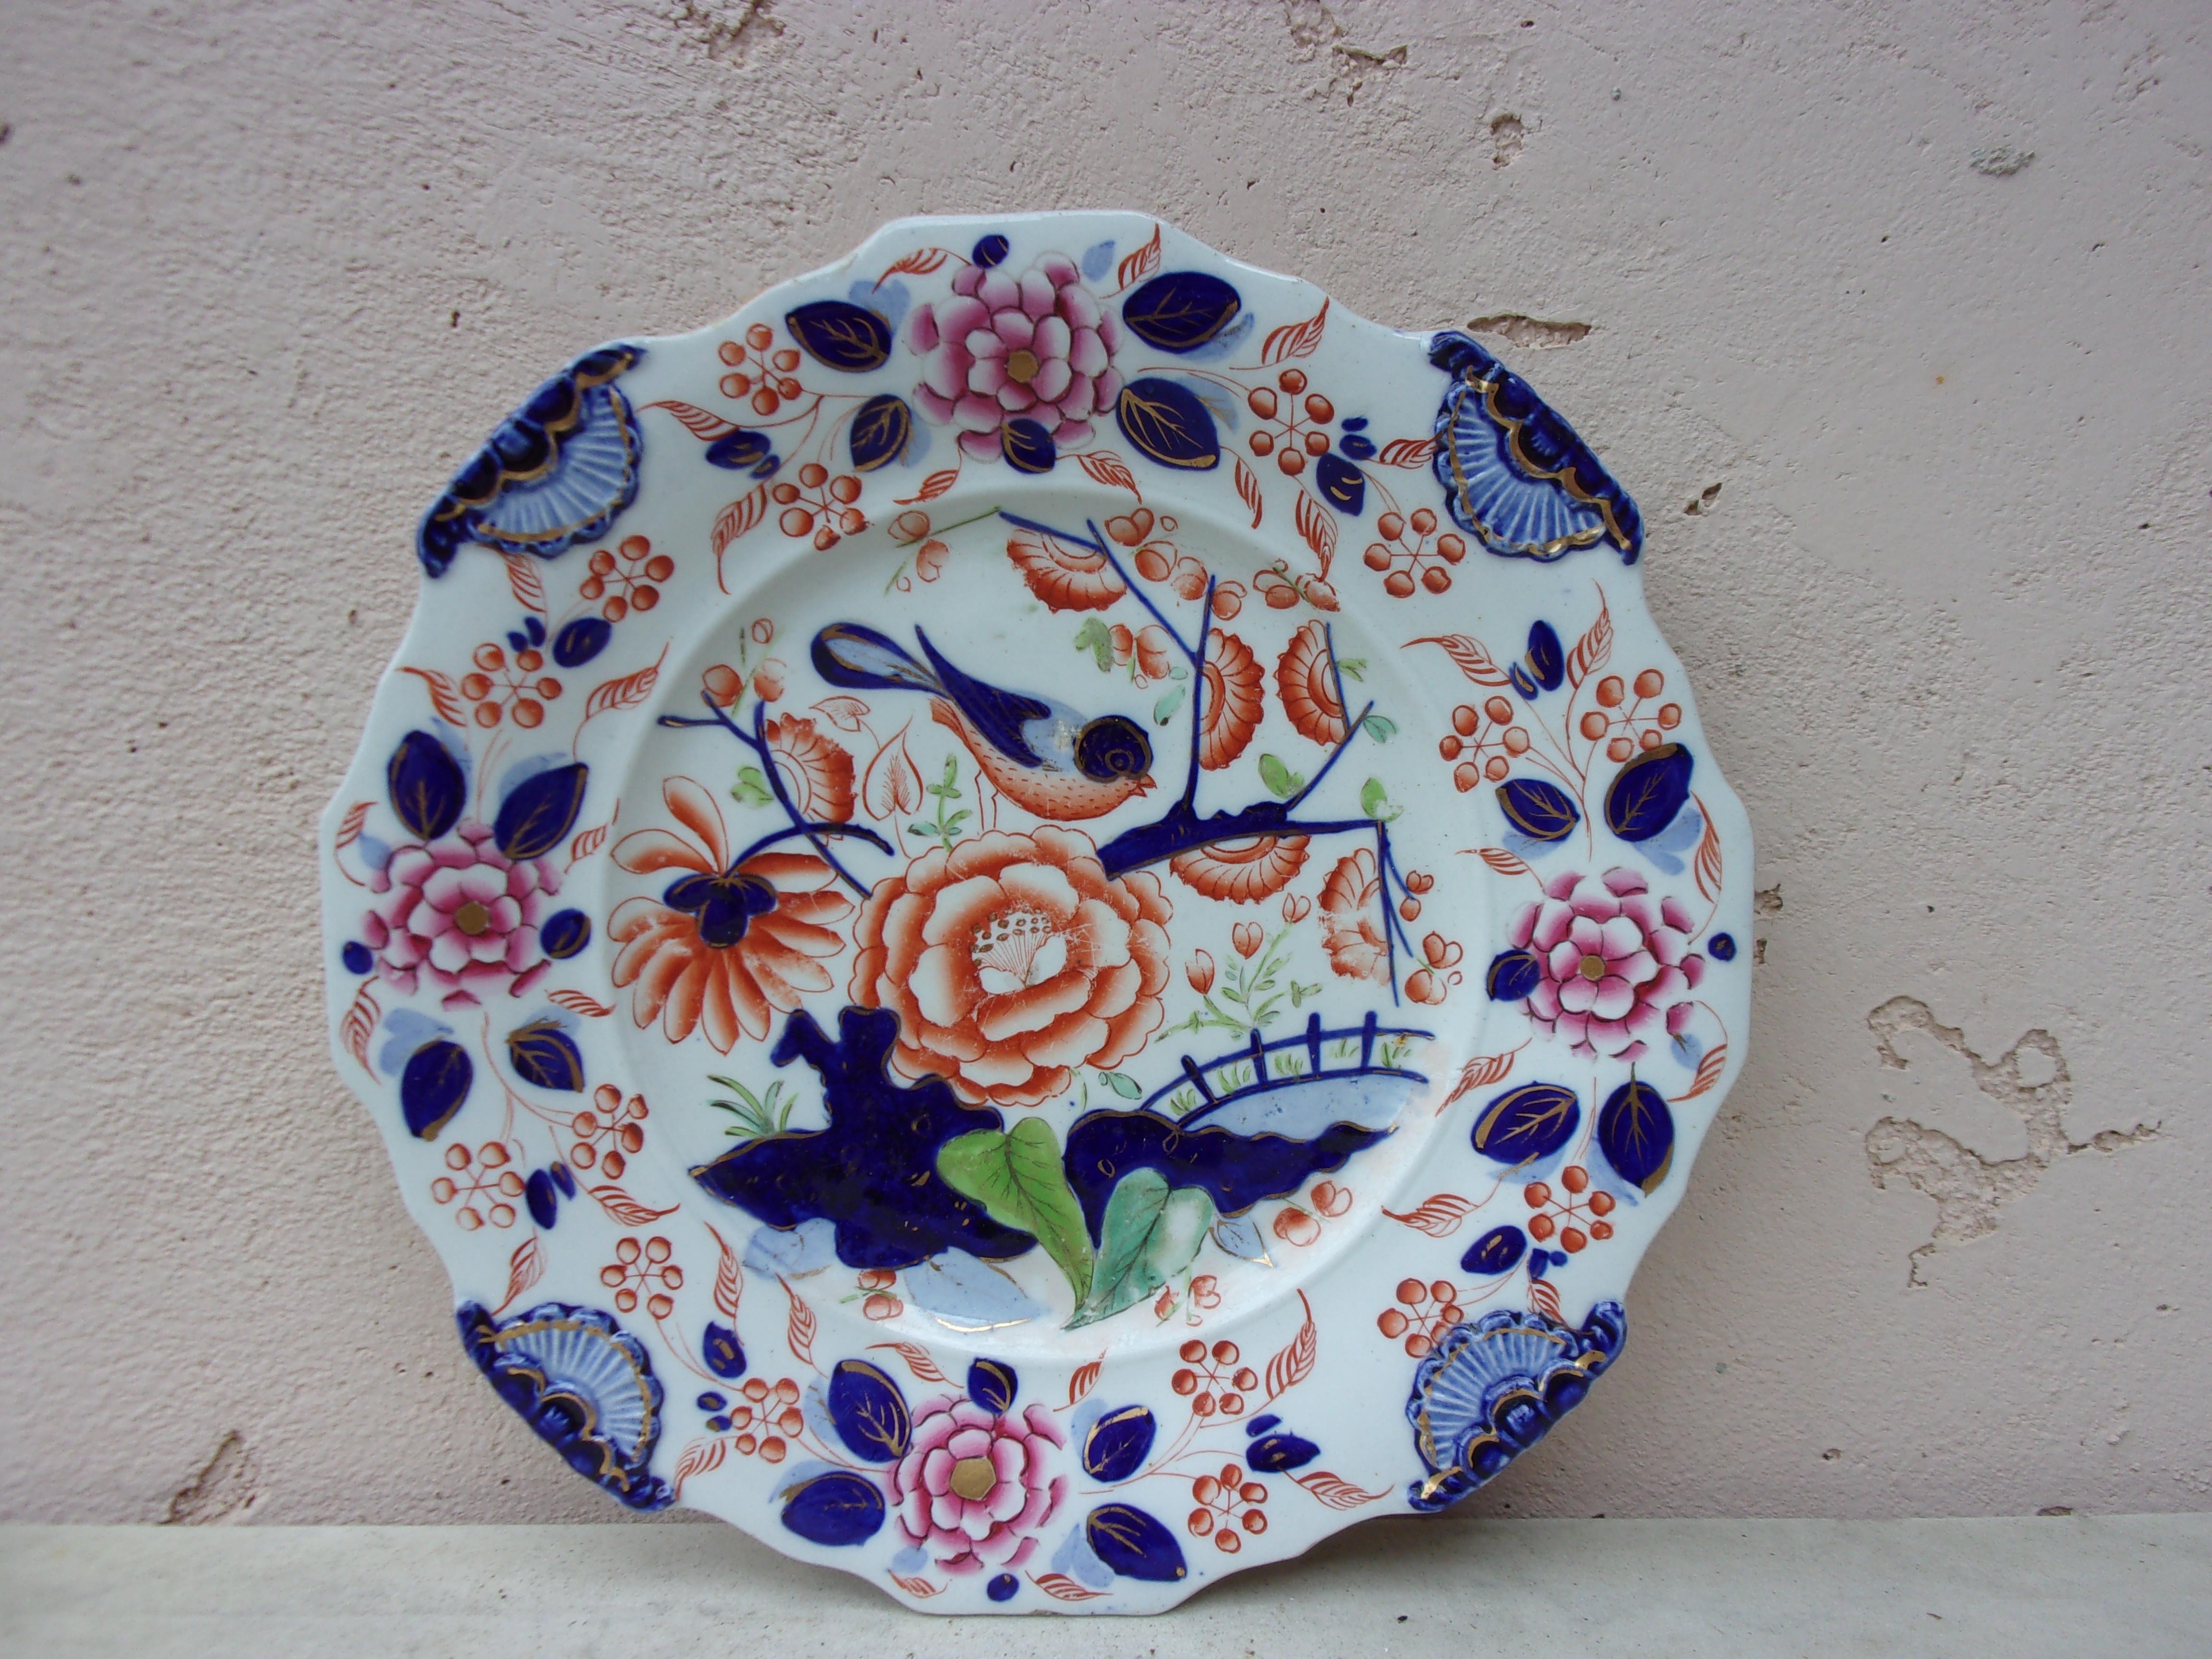 English ironstone plate circa 1890.
Chinoiserie or Imari style, decorated with flowers and a bird.